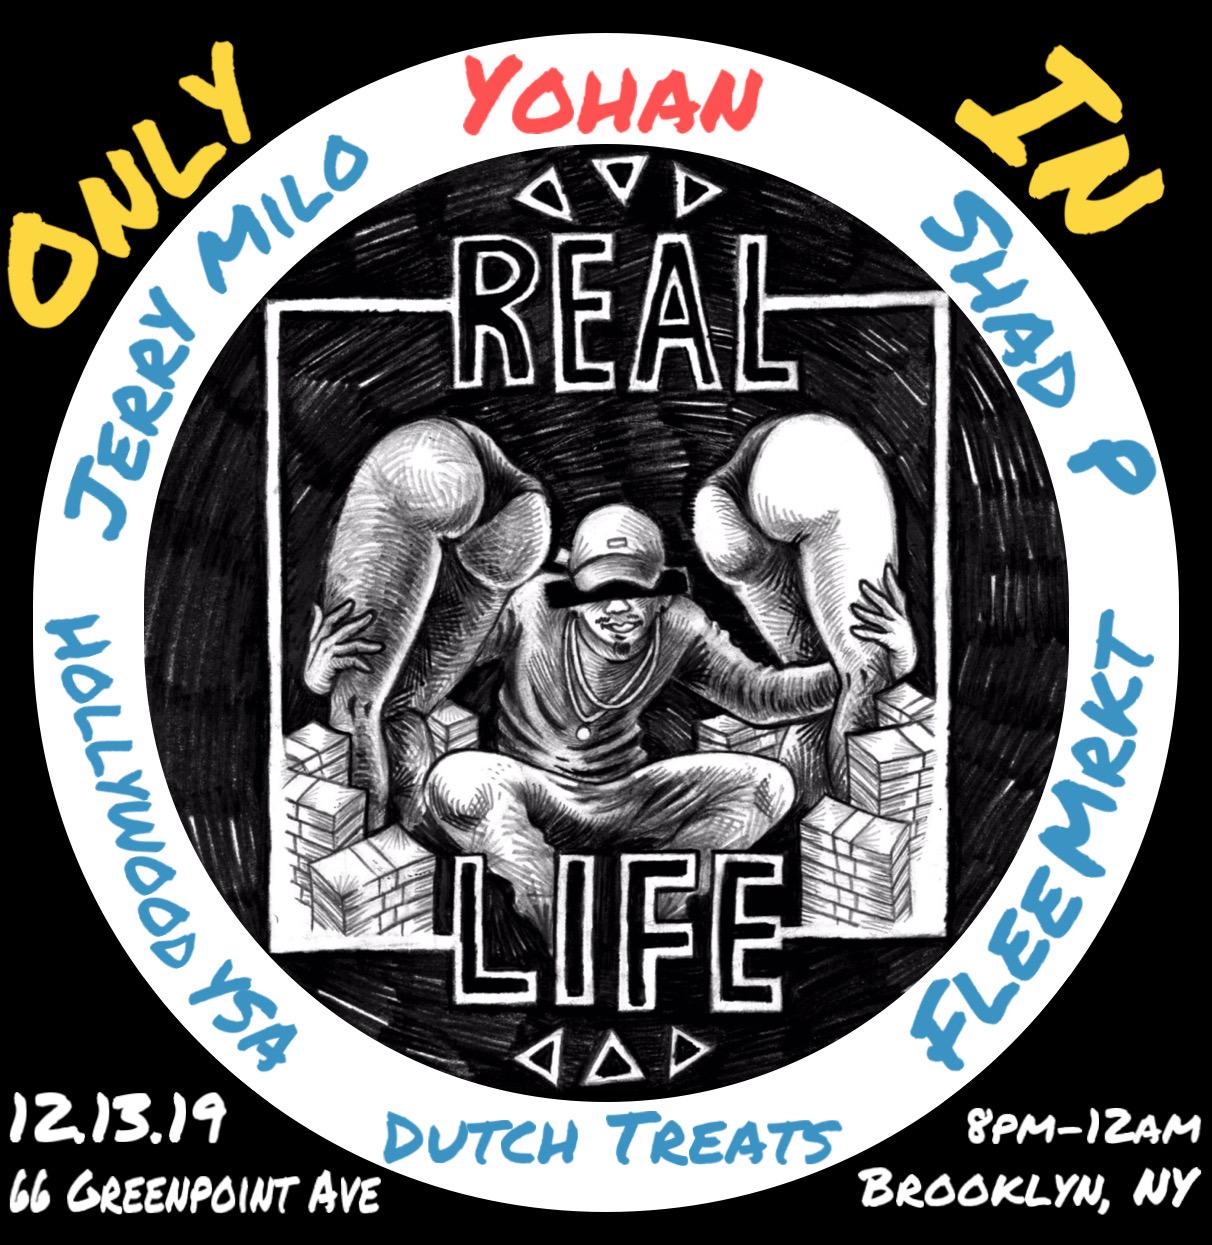 Only In Real Life: Yohan Album Release Concert